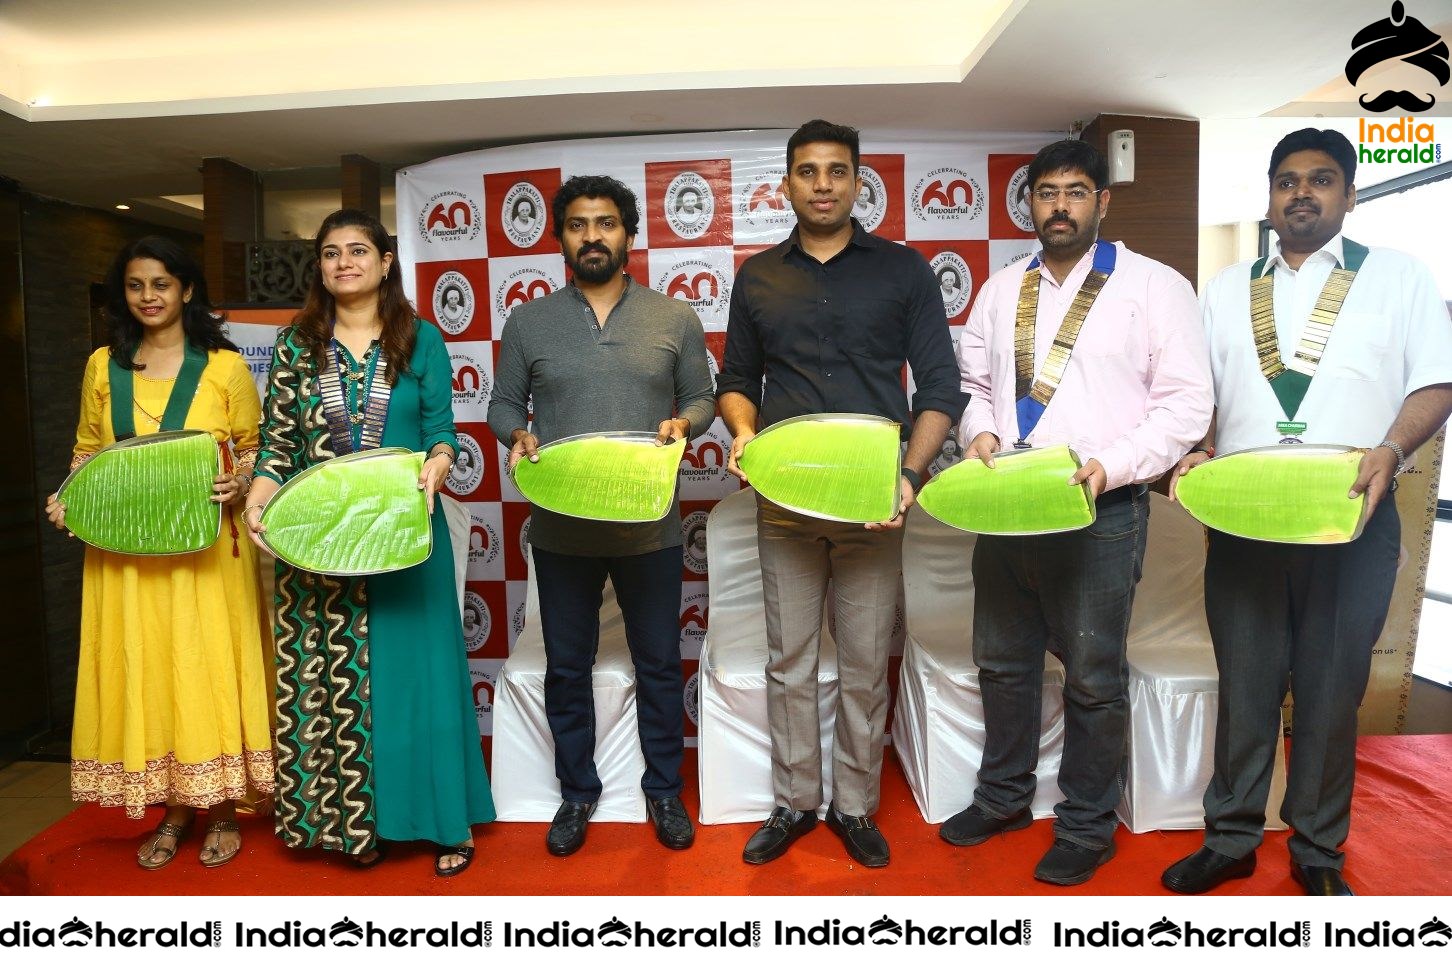 Actor Vaibhav Reddy Launches Dindigul Thalapakatti Clean Plate Challenge Fund Raiser support for Cancer patients Set 1